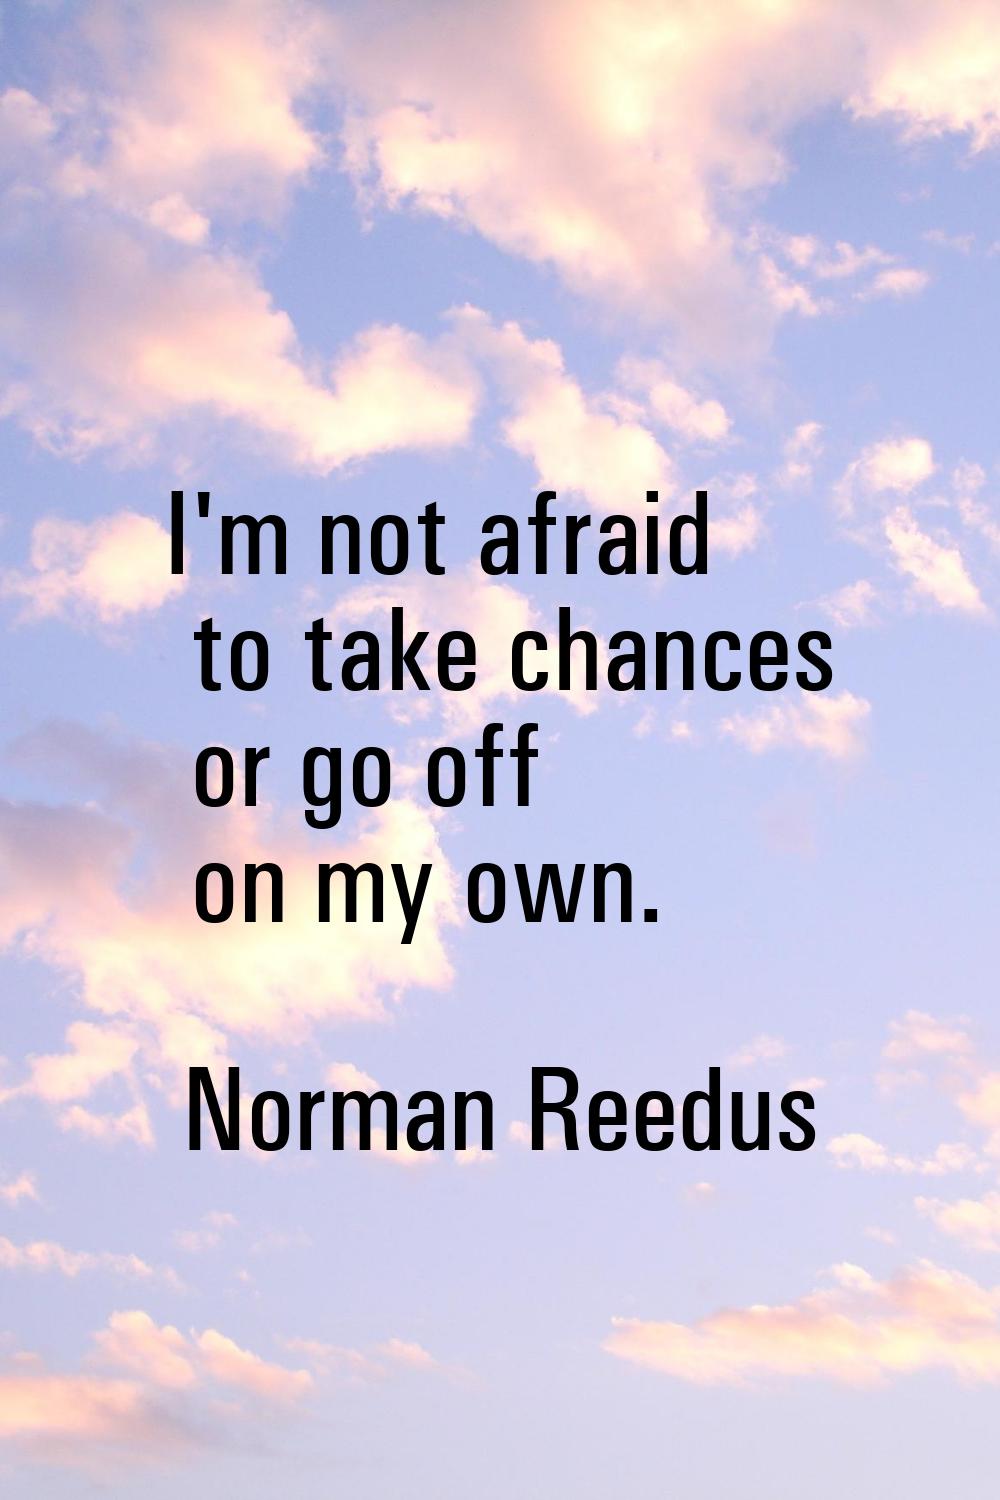 I'm not afraid to take chances or go off on my own.